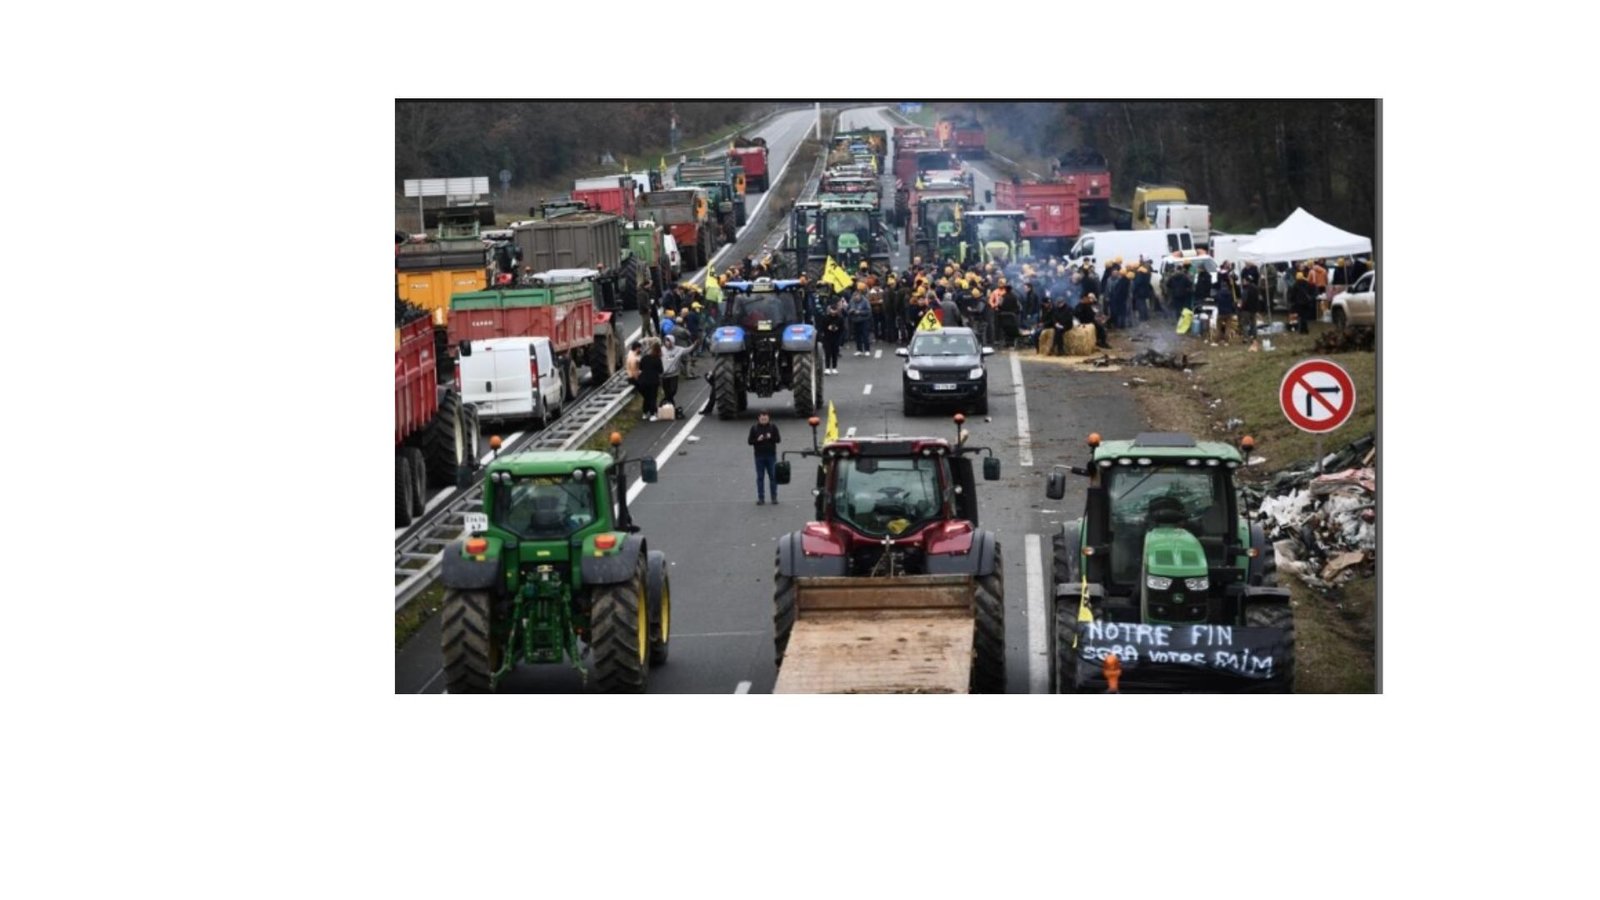 farmers protest in france